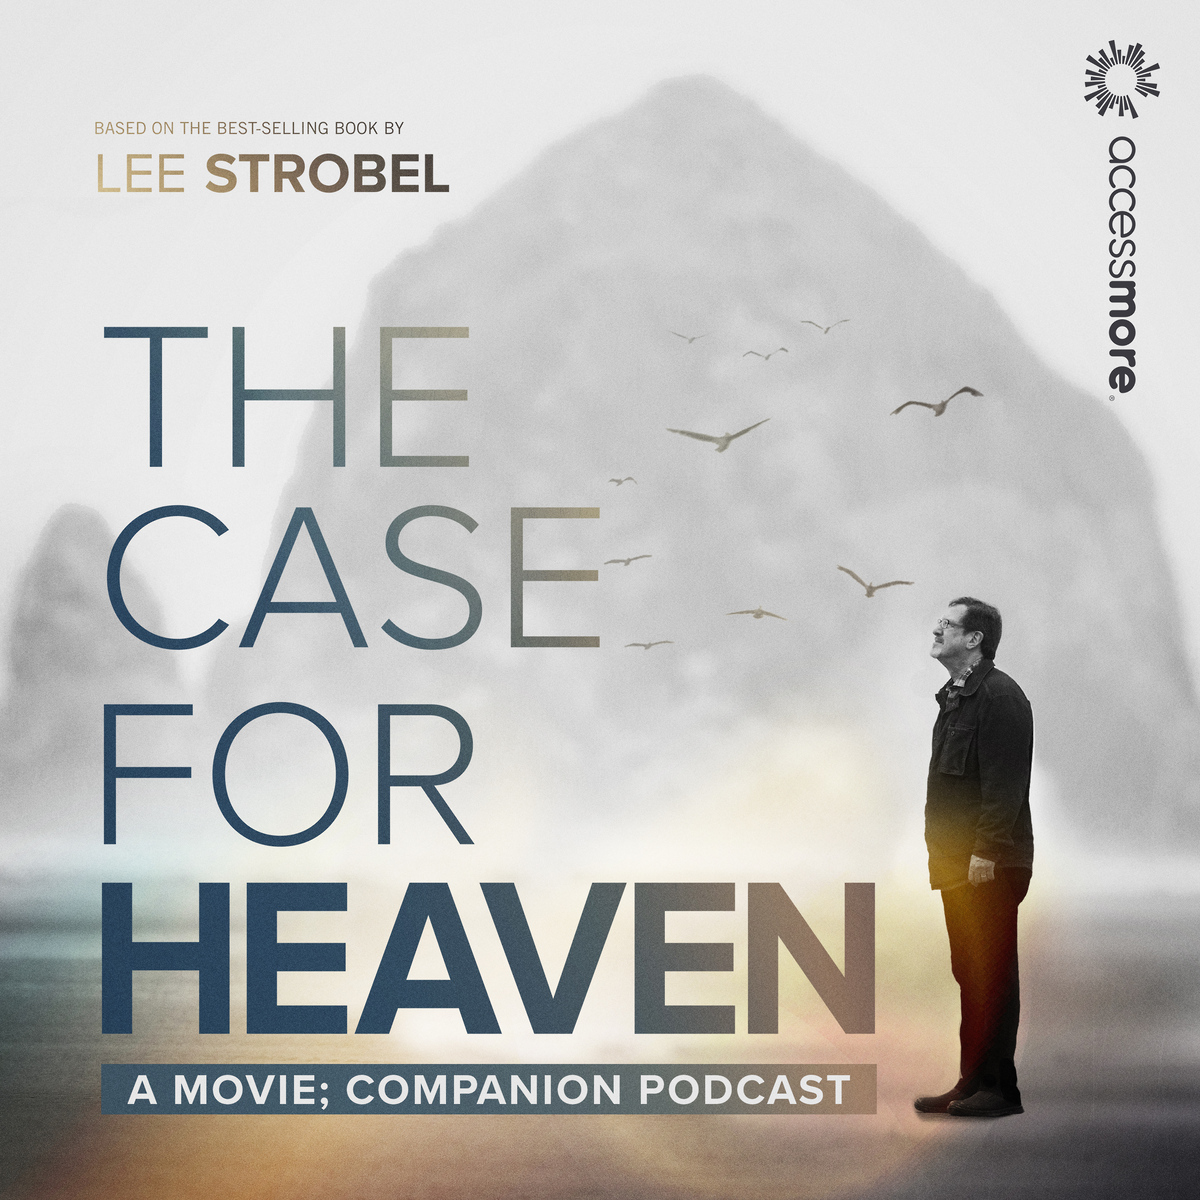 Introducing The Case for Heaven Companion Podcast